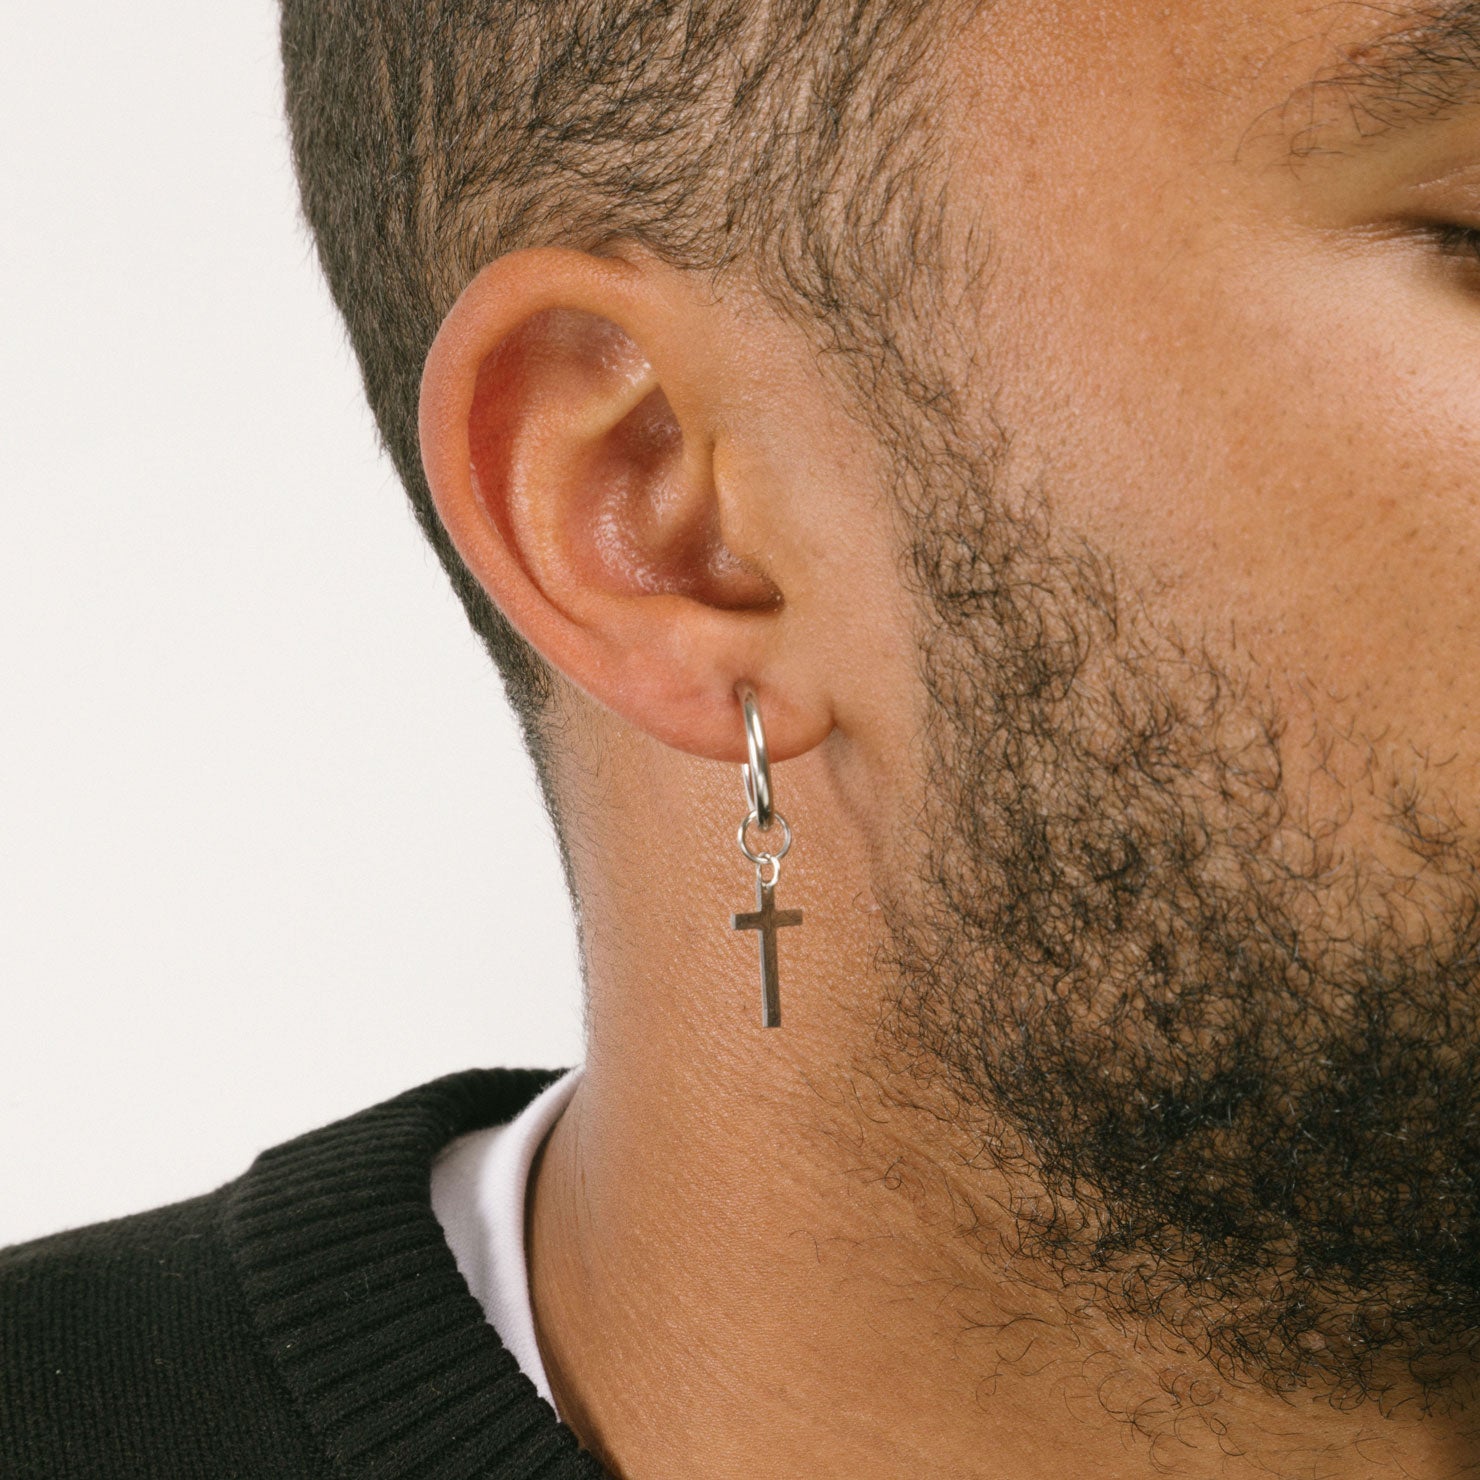 A model wearing the Cross Clip On Earrings are designed for small to thin earlobes. Their secure closure type sliding spring and adjustable features make them comfortable to wear for up to 4 hours. Made of stainless steel moreover, they are non-tarnish, water resistant, and free of lead, nickel, and cadmium.